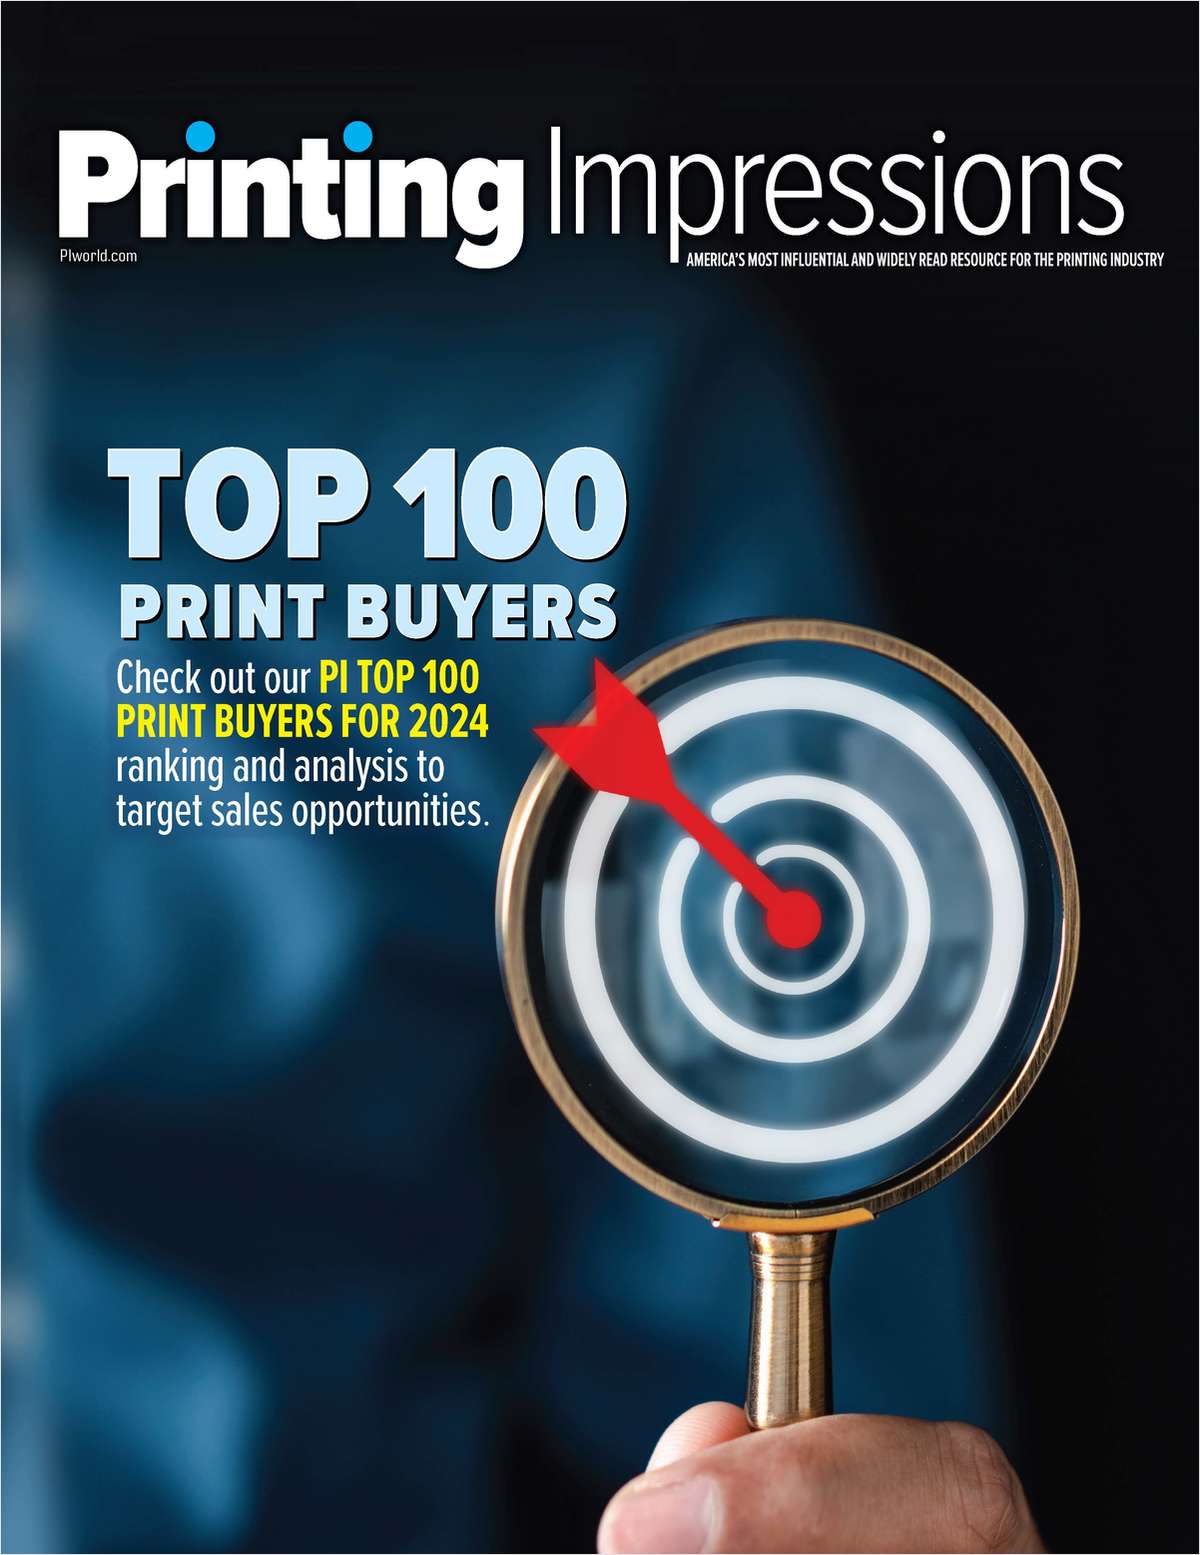 Top 100 Print Buyers Forecasted for 2024